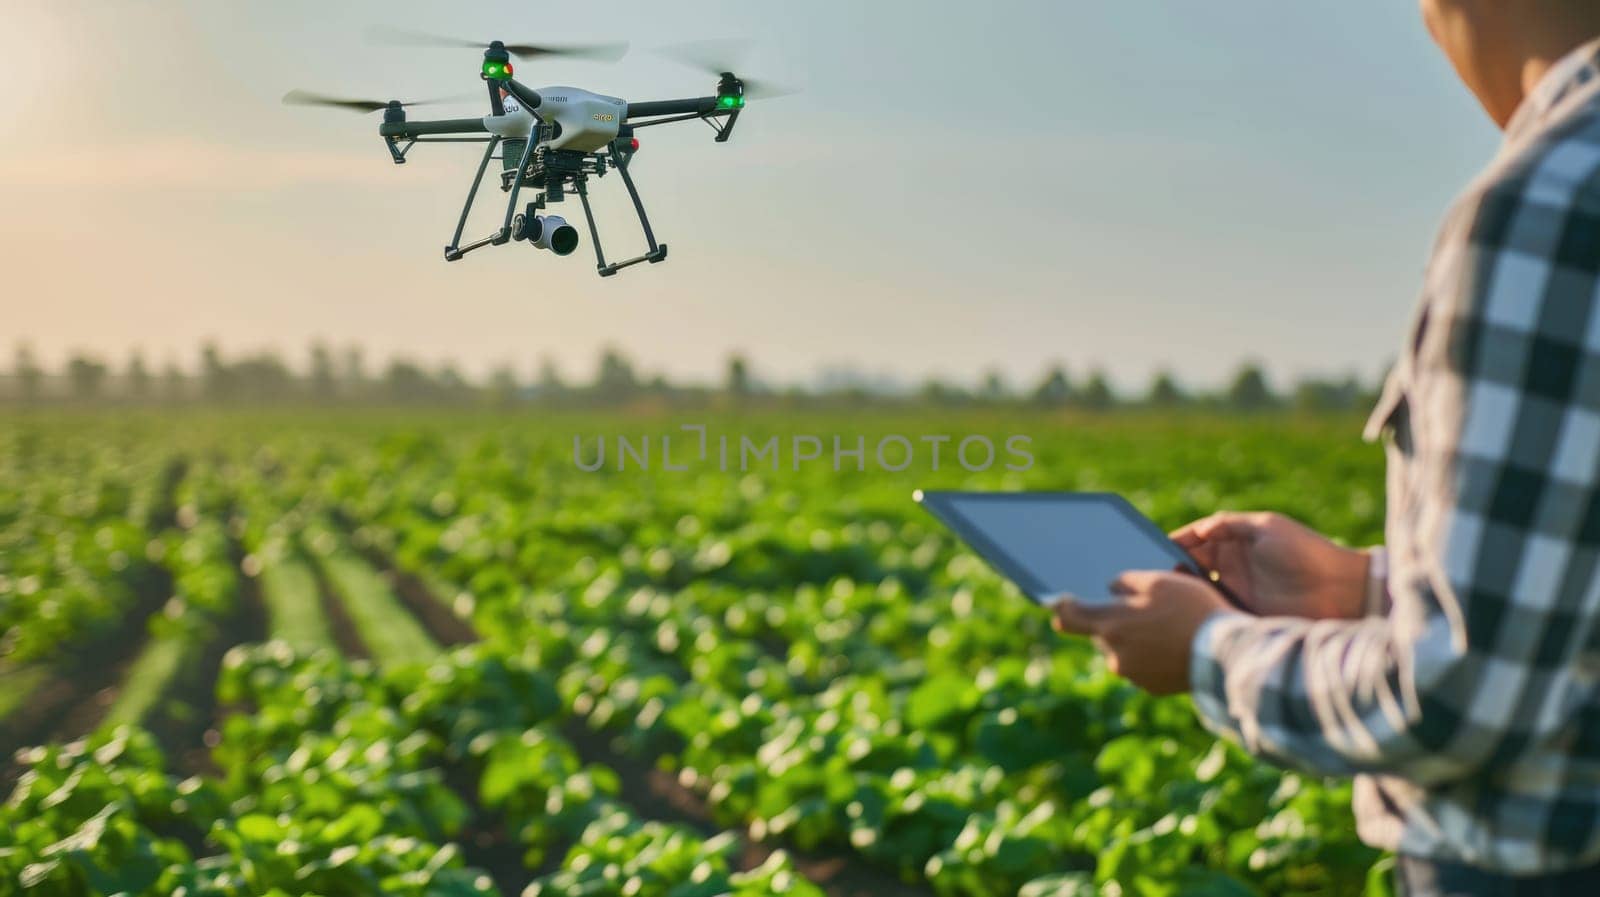 A woman flies a drone over a grassy field by making gestures AIG41 by biancoblue